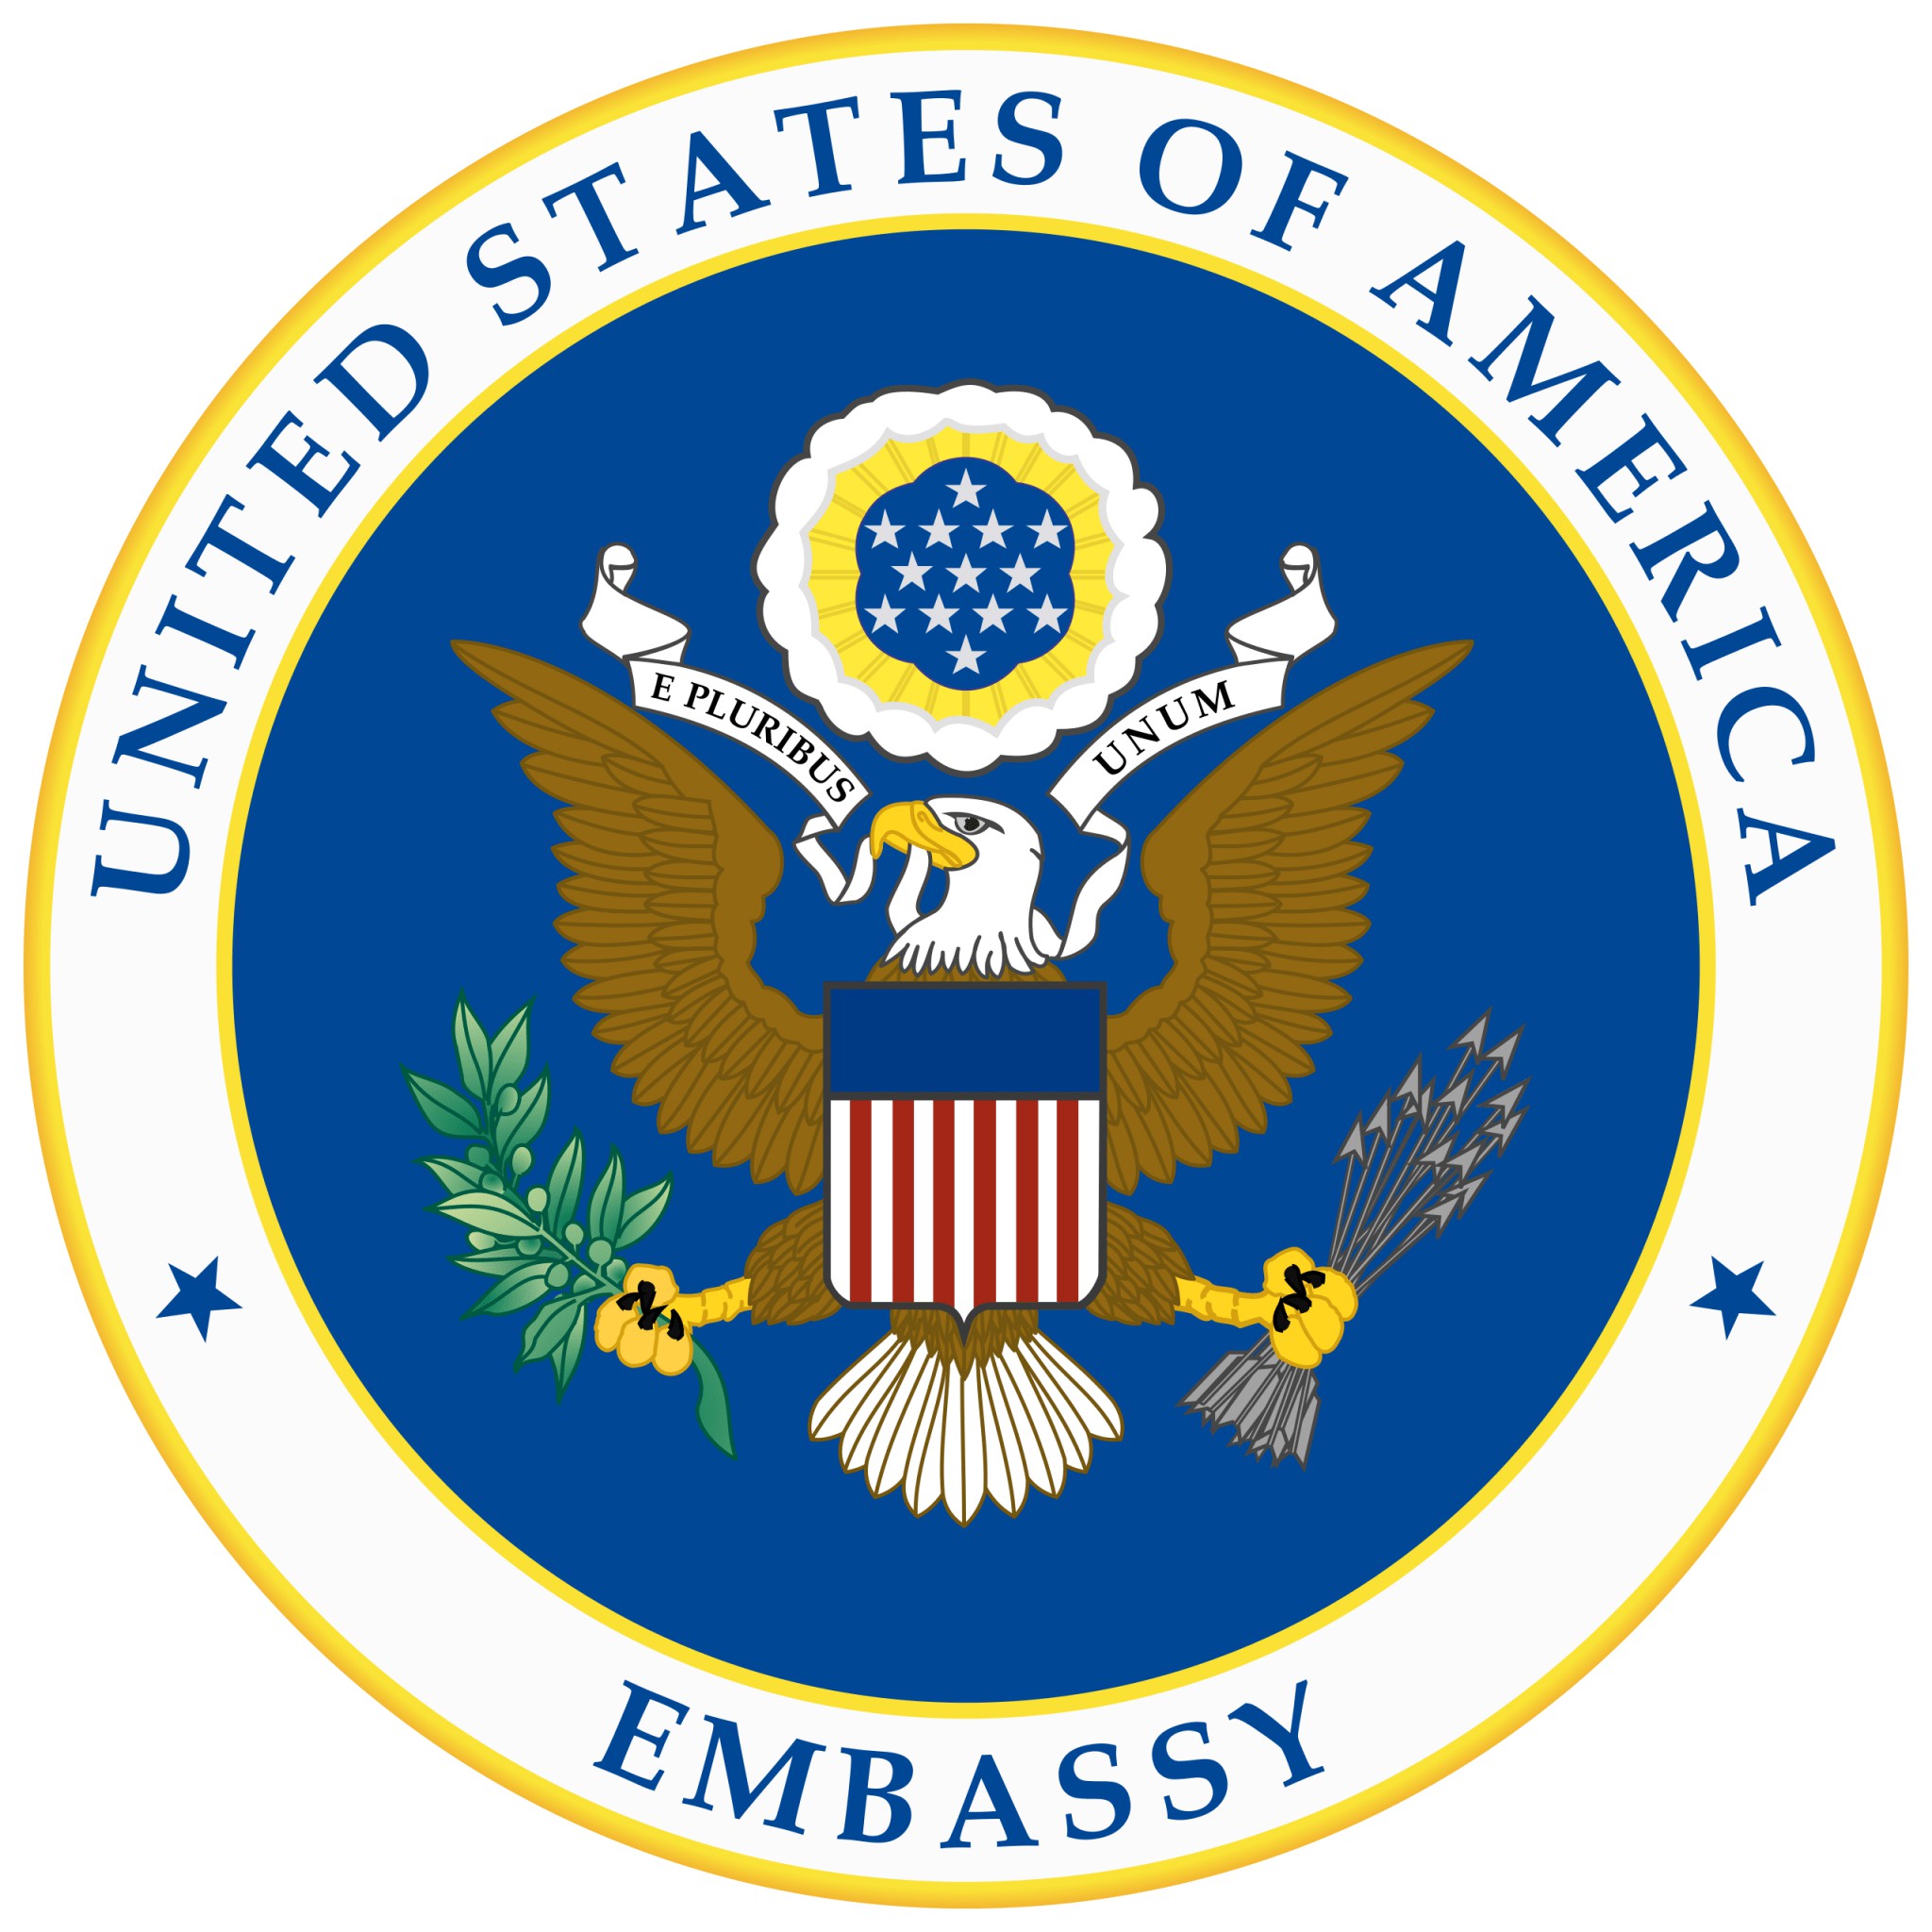 United States of America Embassy Seal